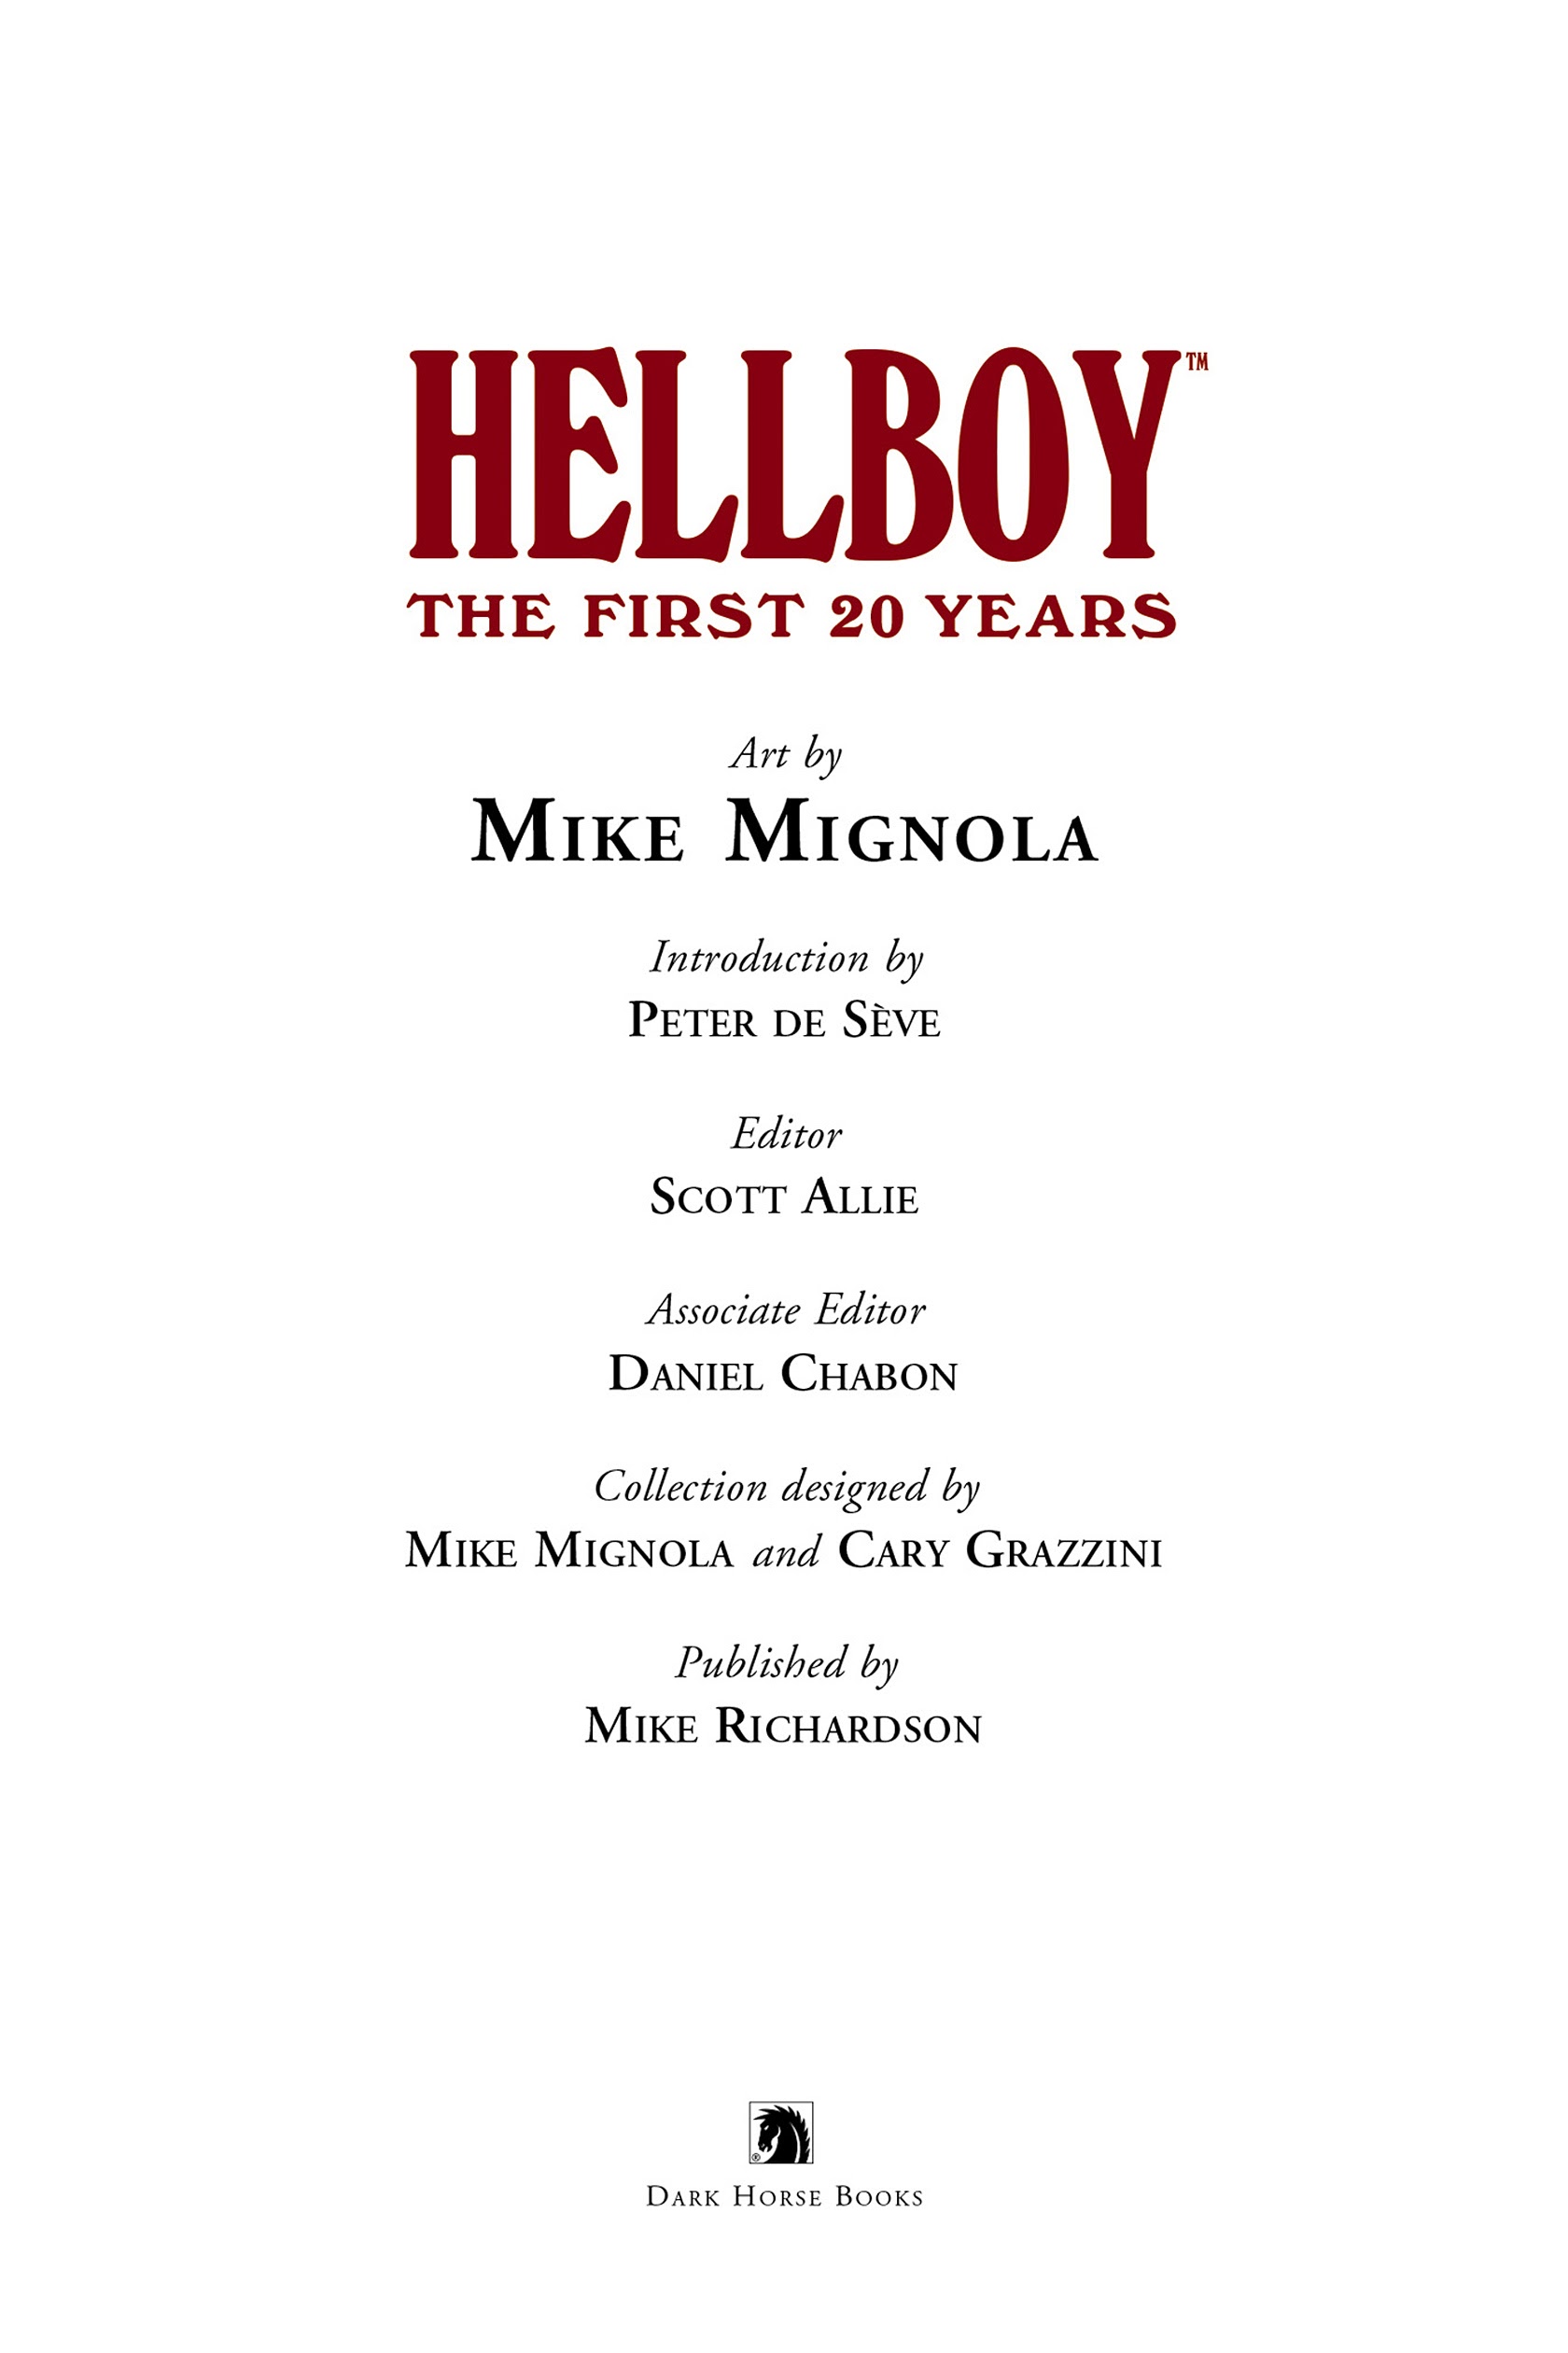 Read online Hellboy: The First 20 Years comic -  Issue # TPB - 3